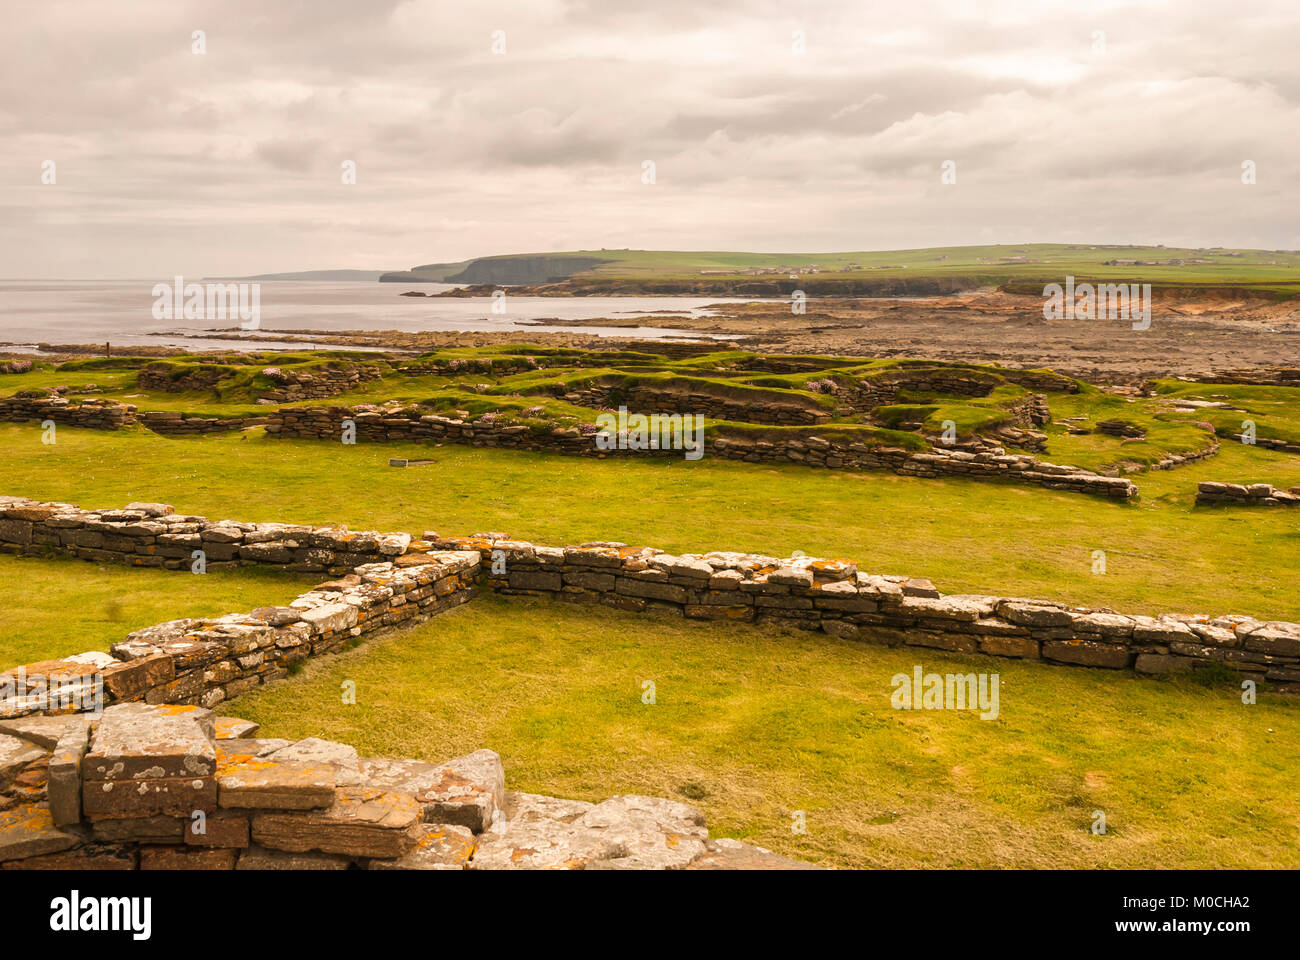 Pictish and Norse settlement remains on the Brough of Birsay, a tidal island off the coast or Orkney, Scotland. 06 June 2010. Stock Photo